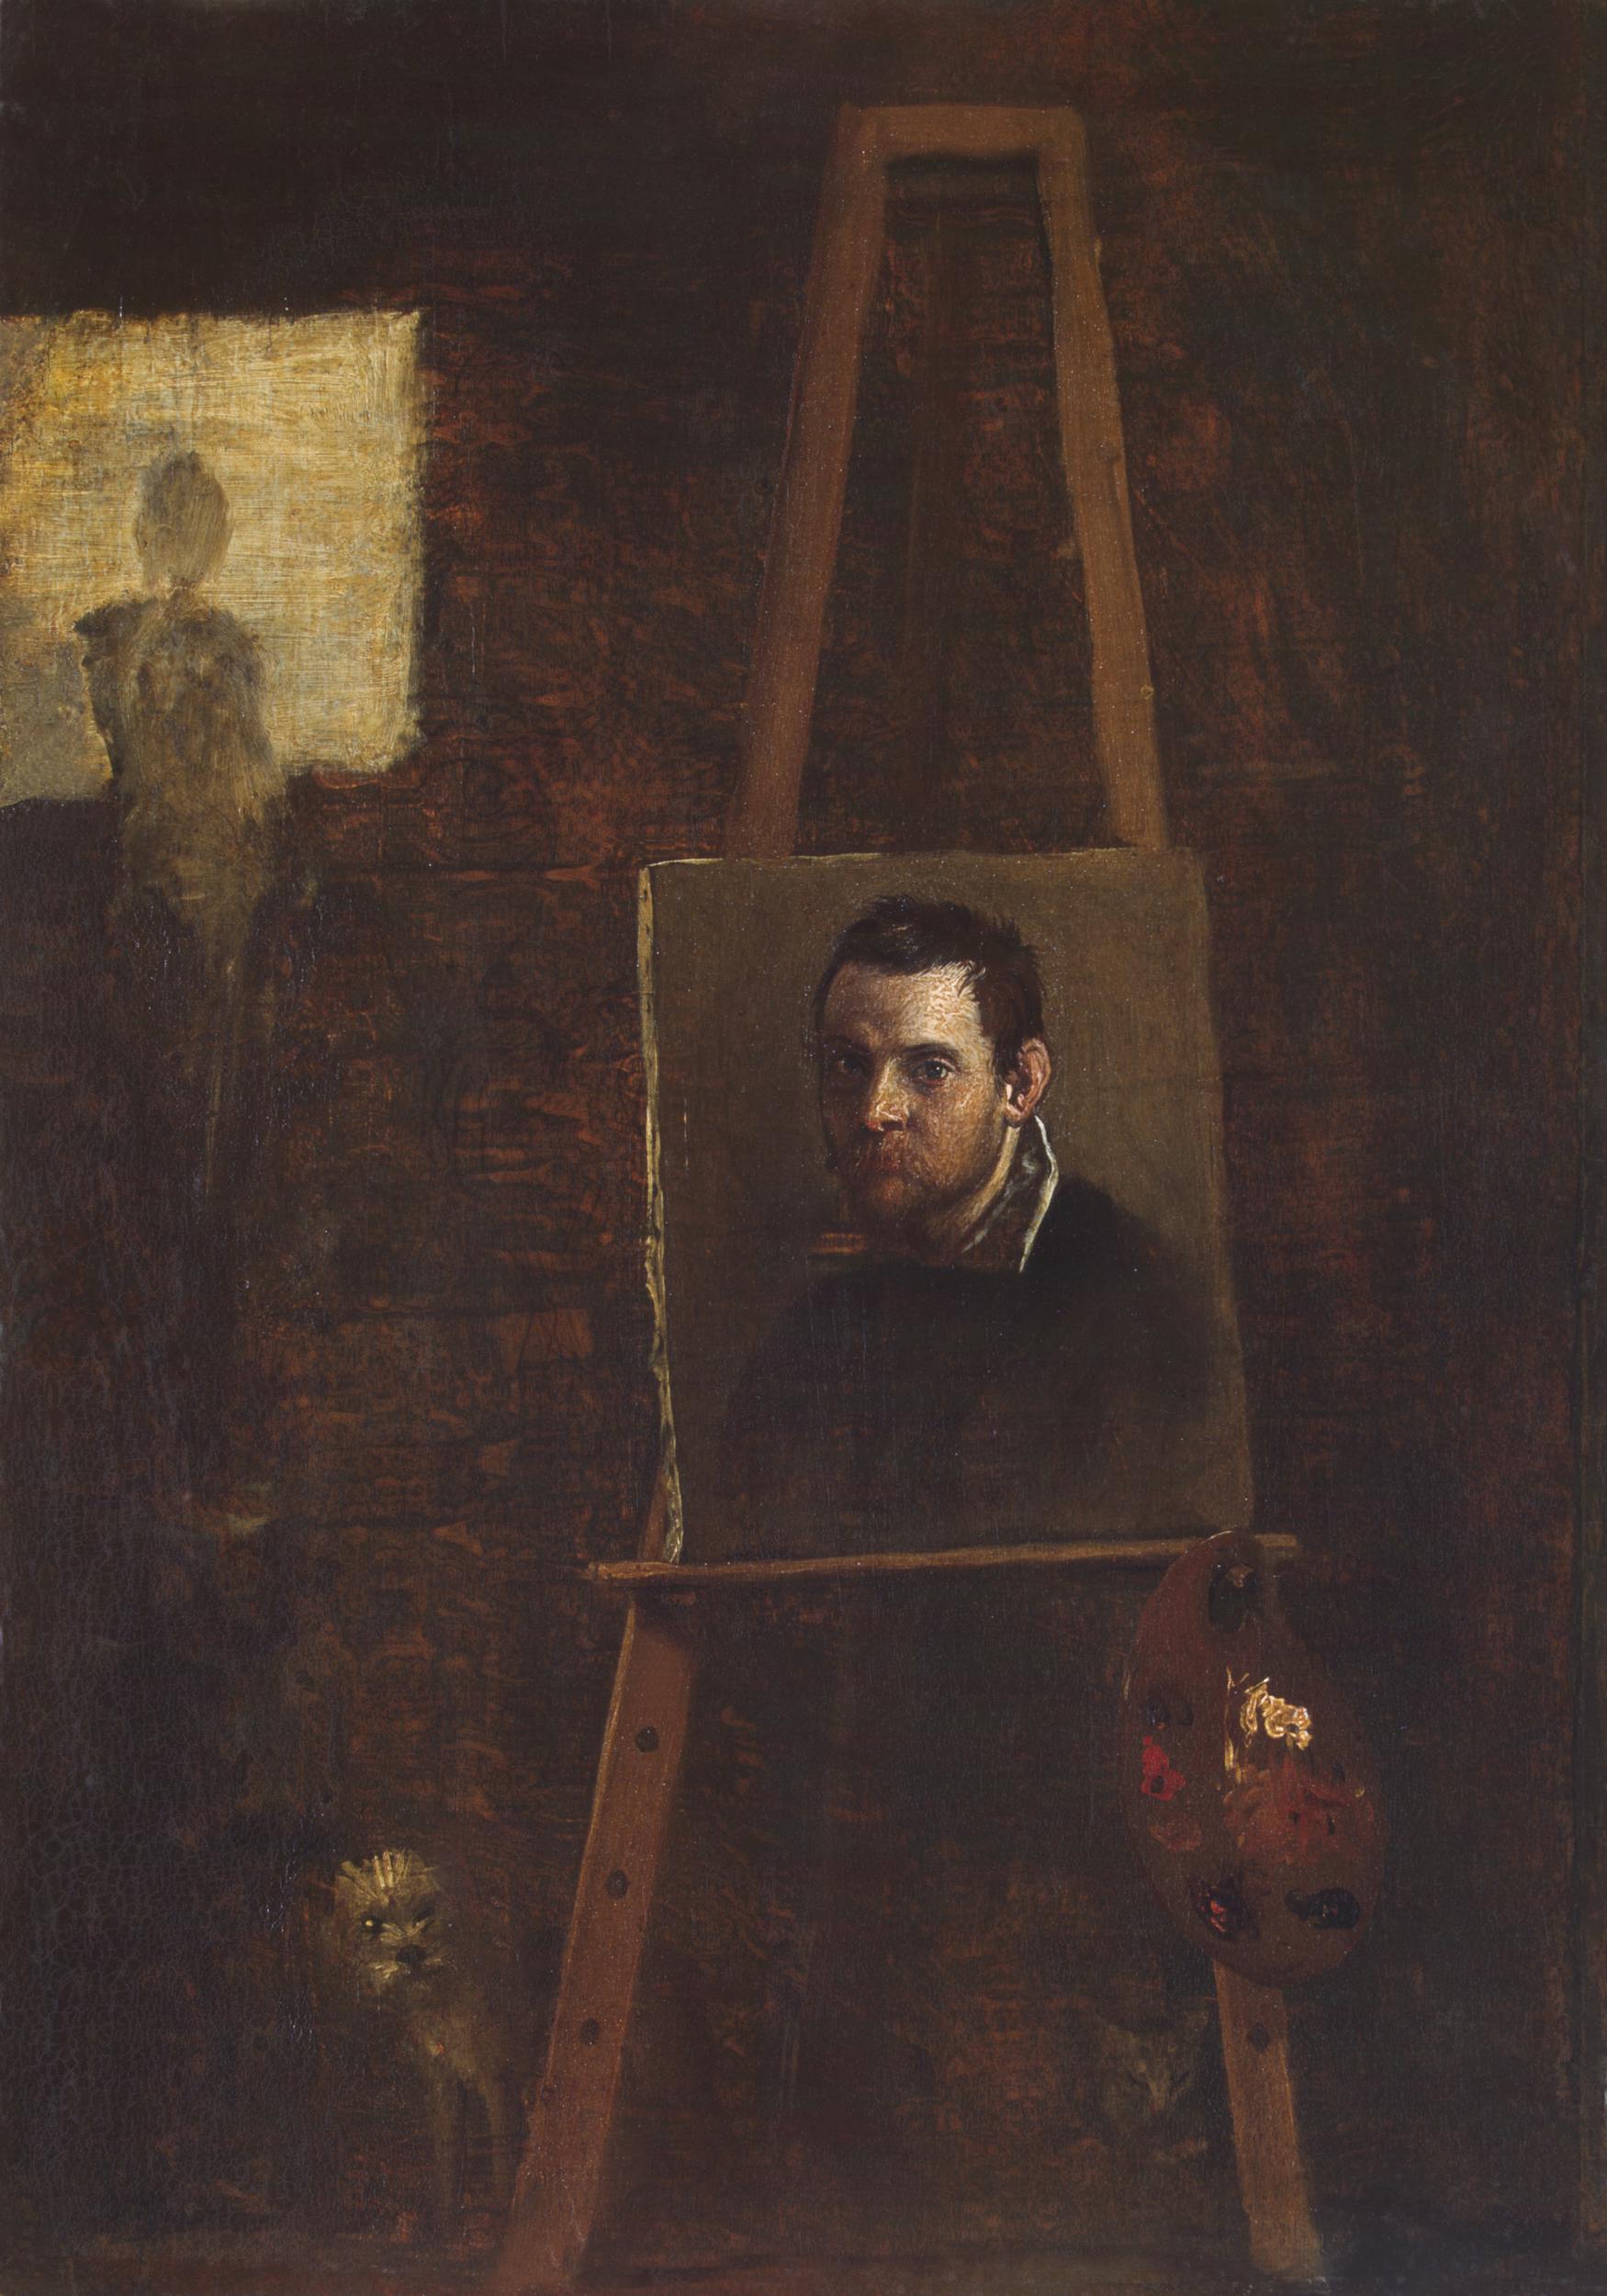 Annibale Carracci, Self-Portrait on an Easel, ca. 1604 or a later copy, oil on panel, 36.5 x 29.8 cm. Florence, Uffizi Gallery (inv. 1890, no. 1774).